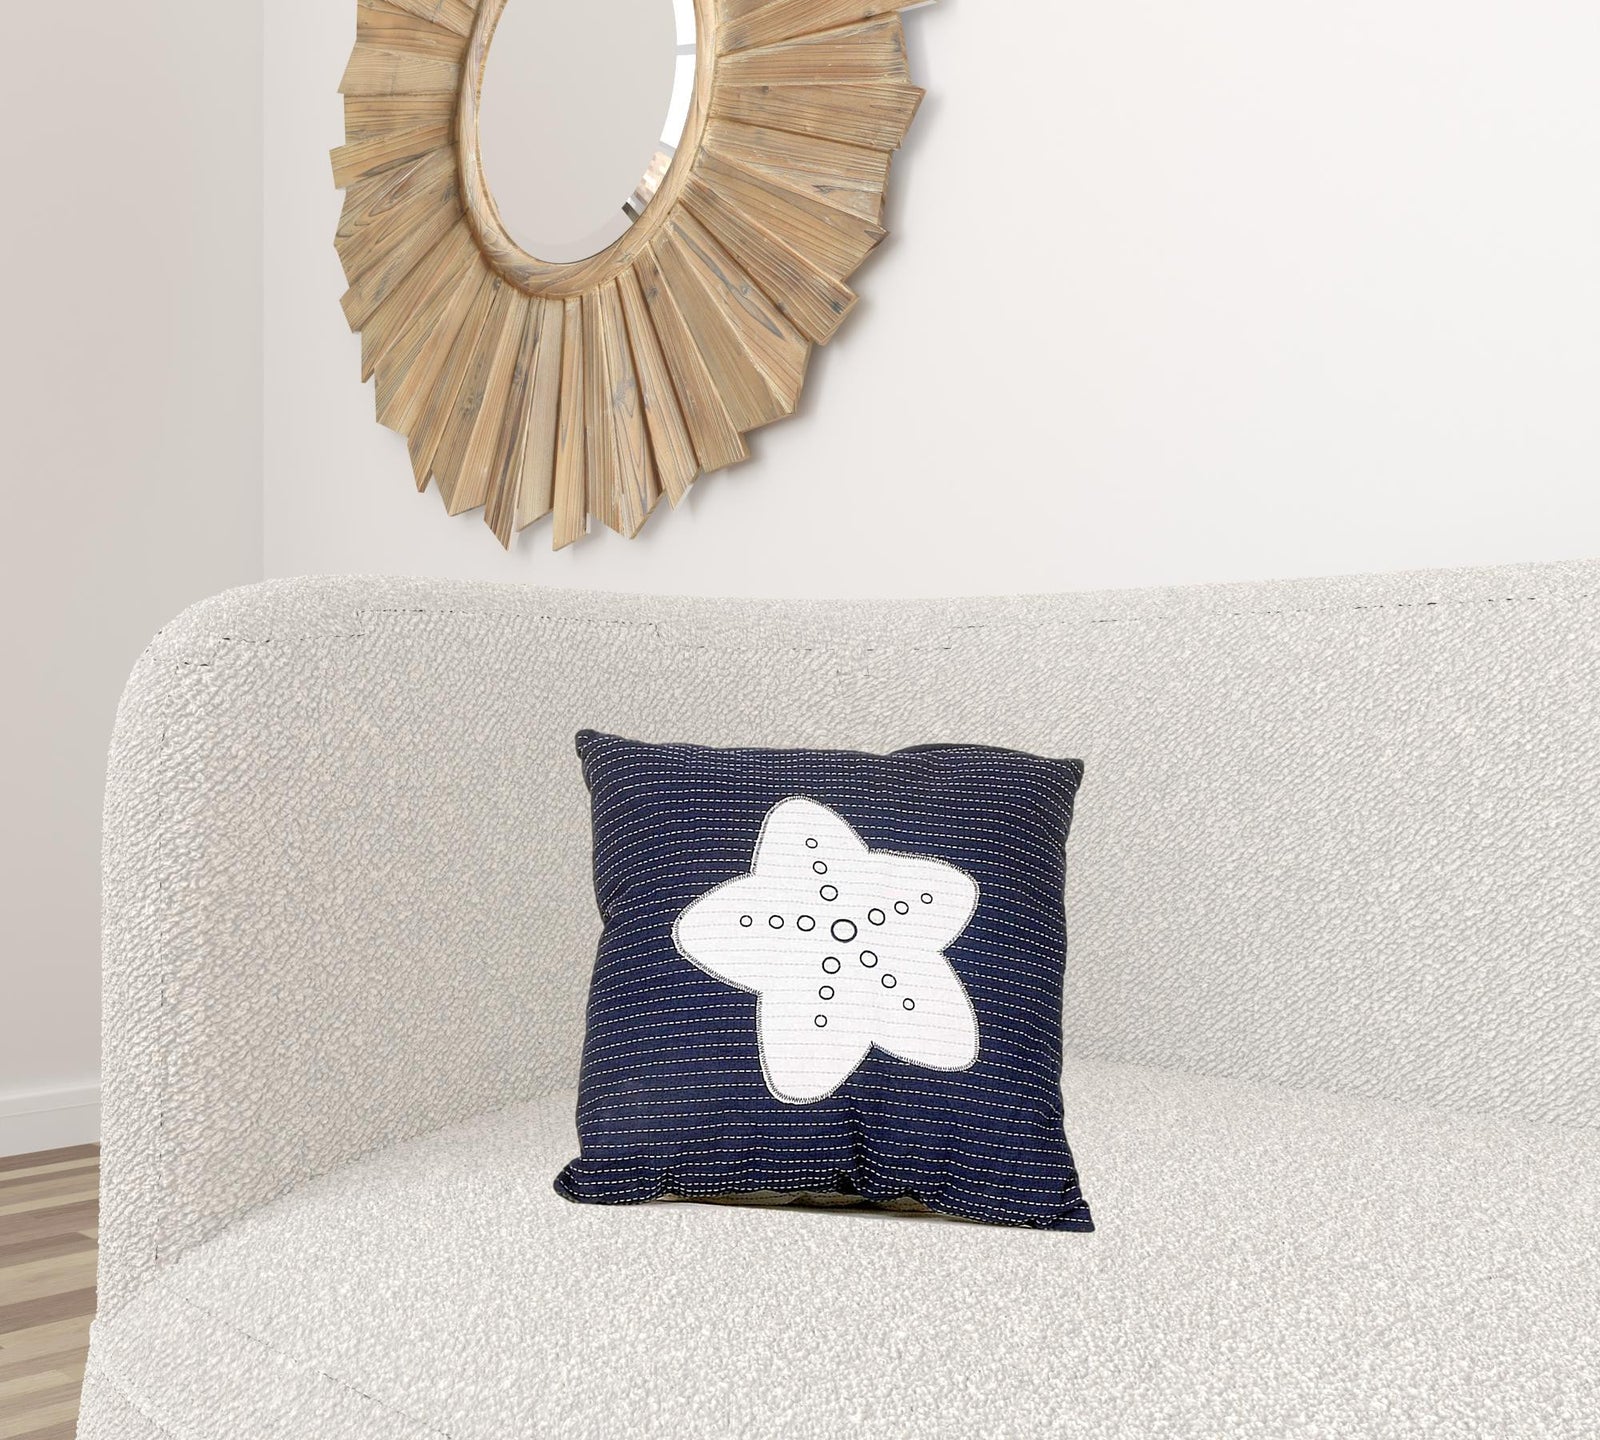 Nautical White Star Blue Square Accent Pillow